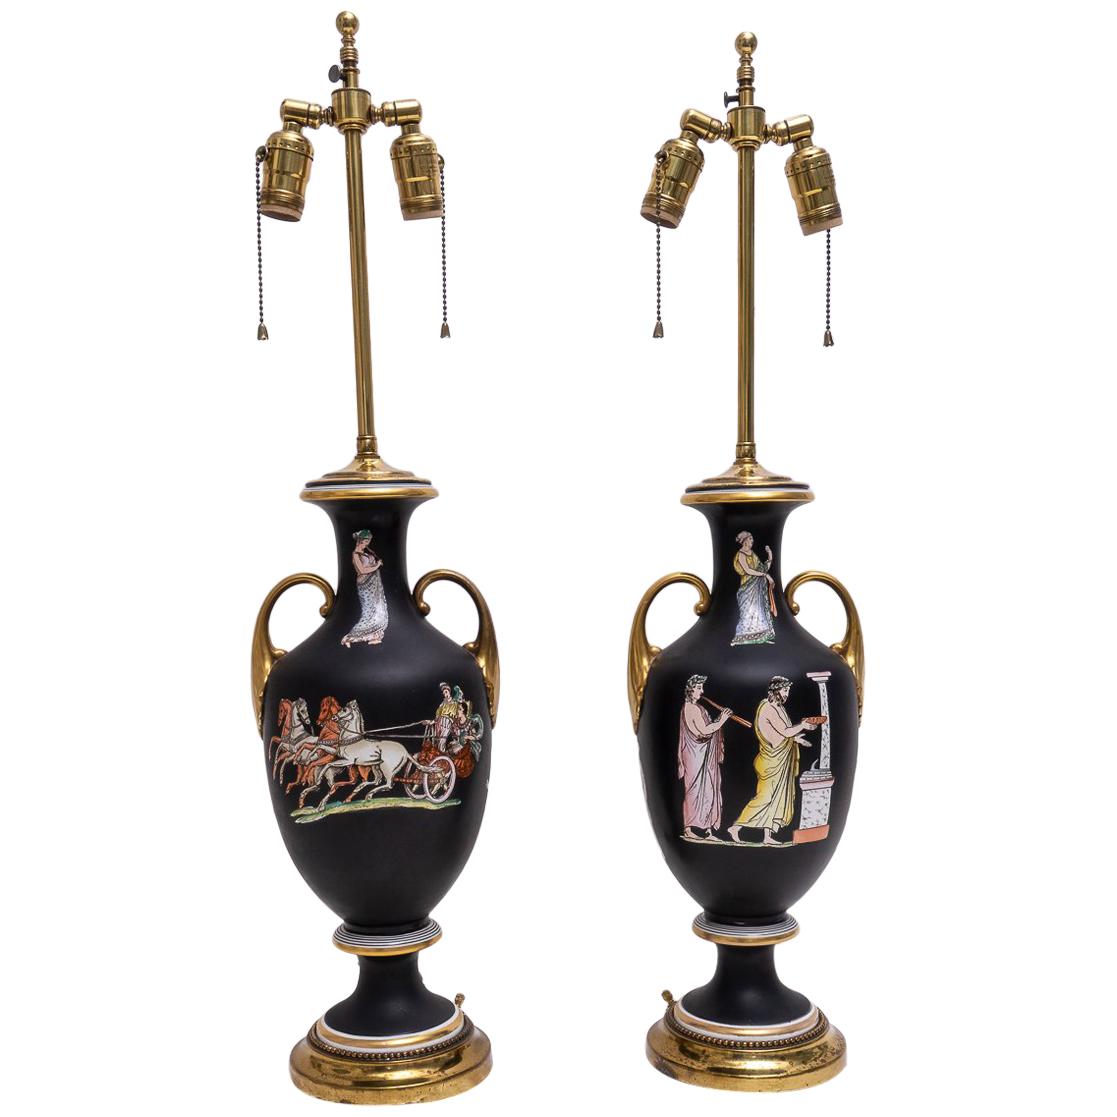 Pair of Neoclassical Table Lamps